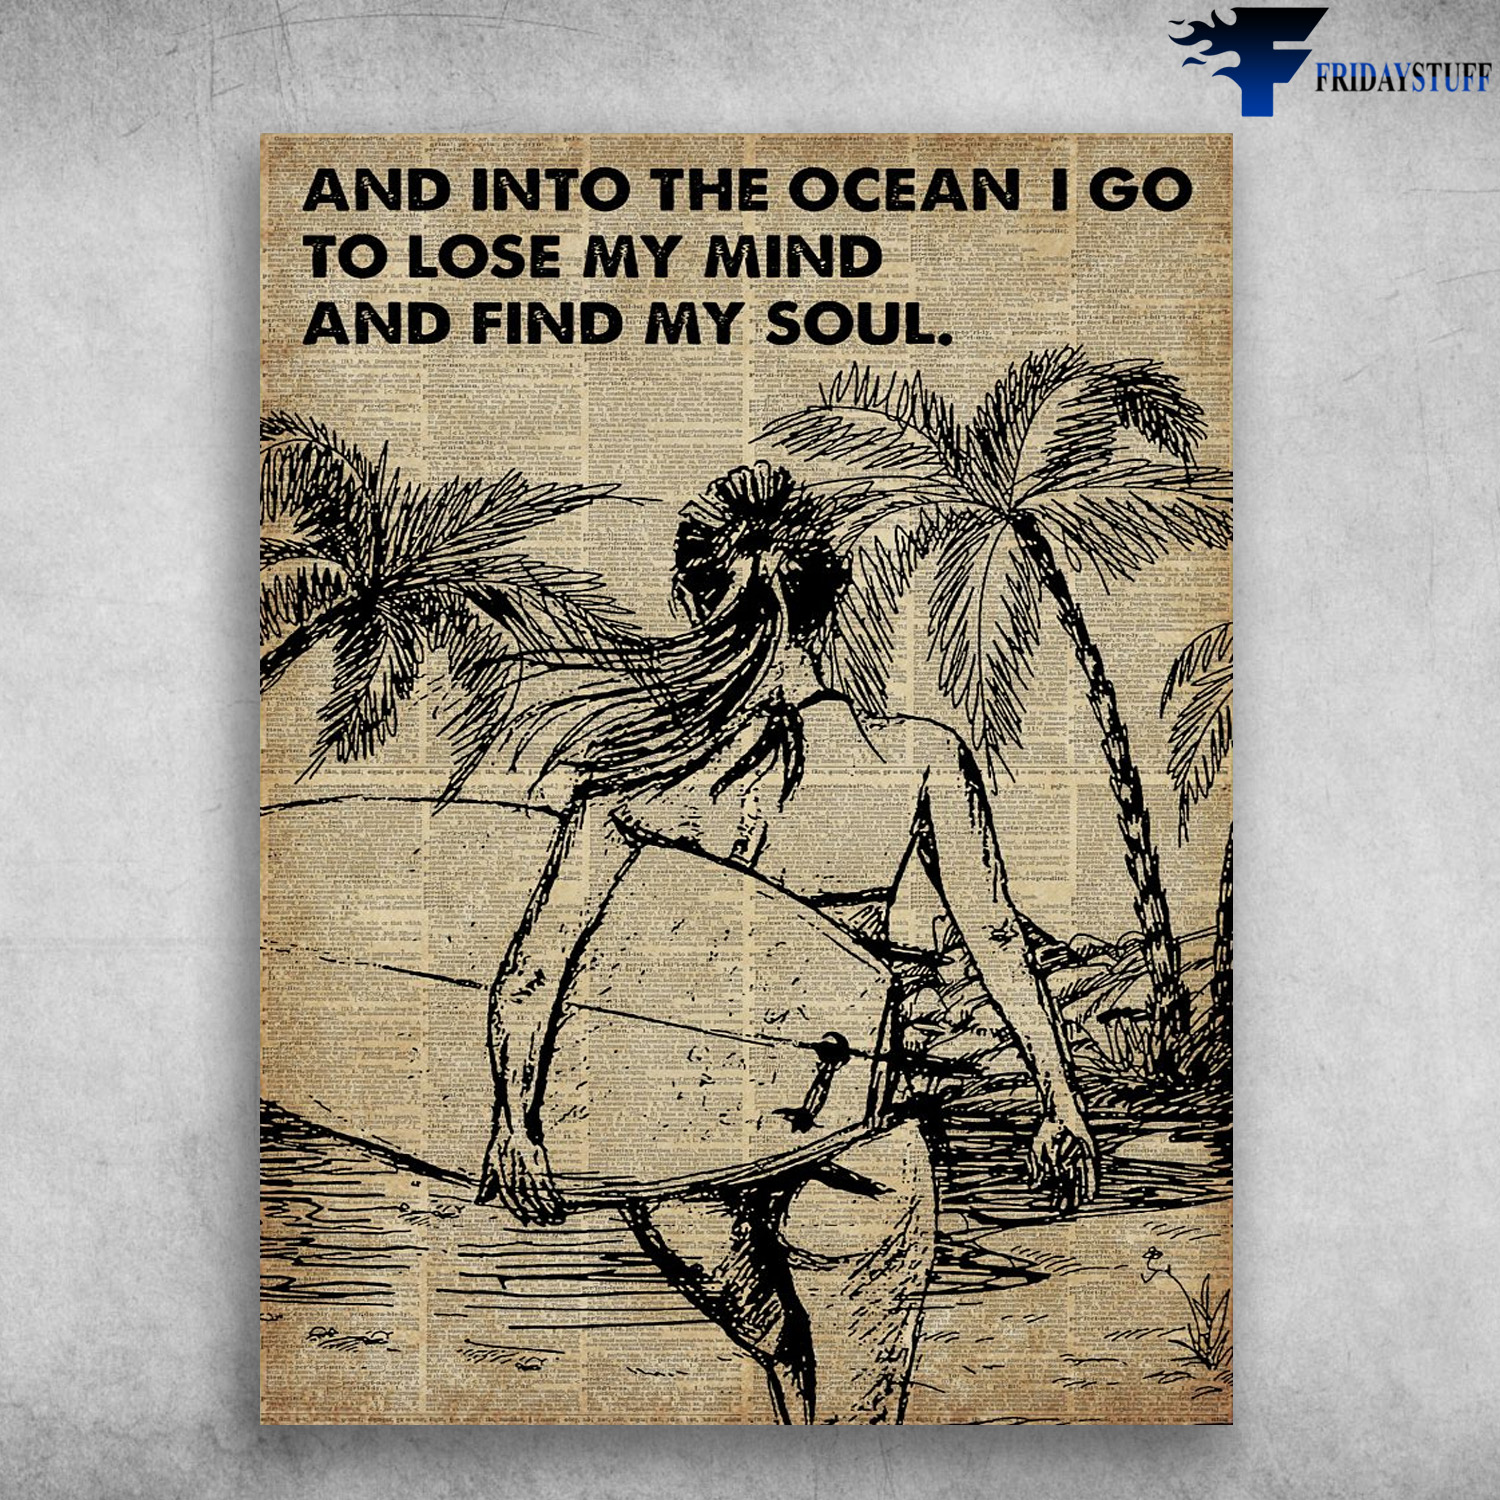 Girl Love Beach, Surfing Poster - And Into The Ocean, I Go To Lose My Mind, And Find My Soul